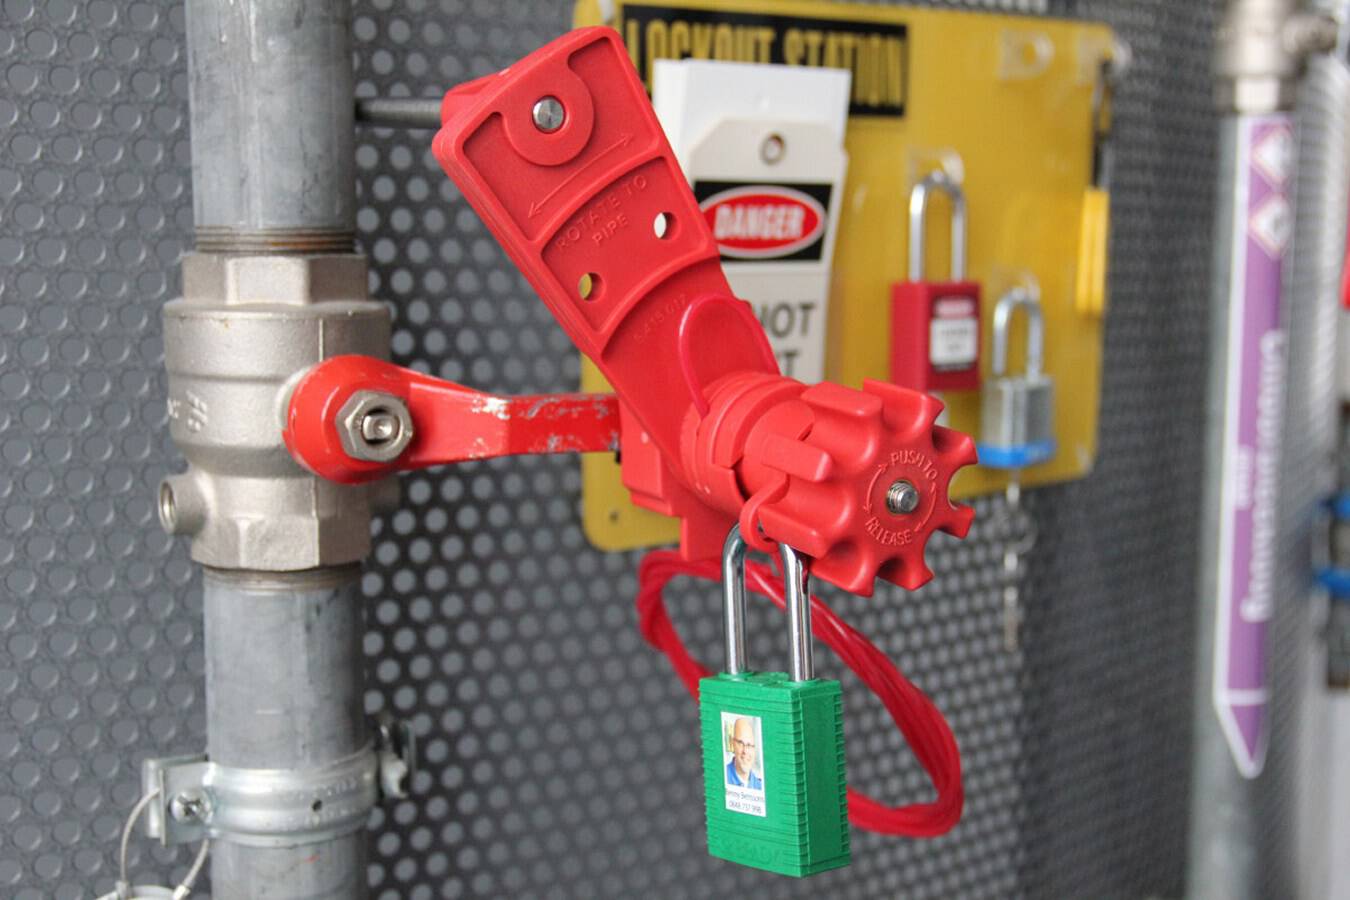 Case study: Increase safety during machine interventions Lockout/ Tagout procedures were implemented to improve safety during maintenance activities at production sites of Groupe Lactalis in the Netherlands